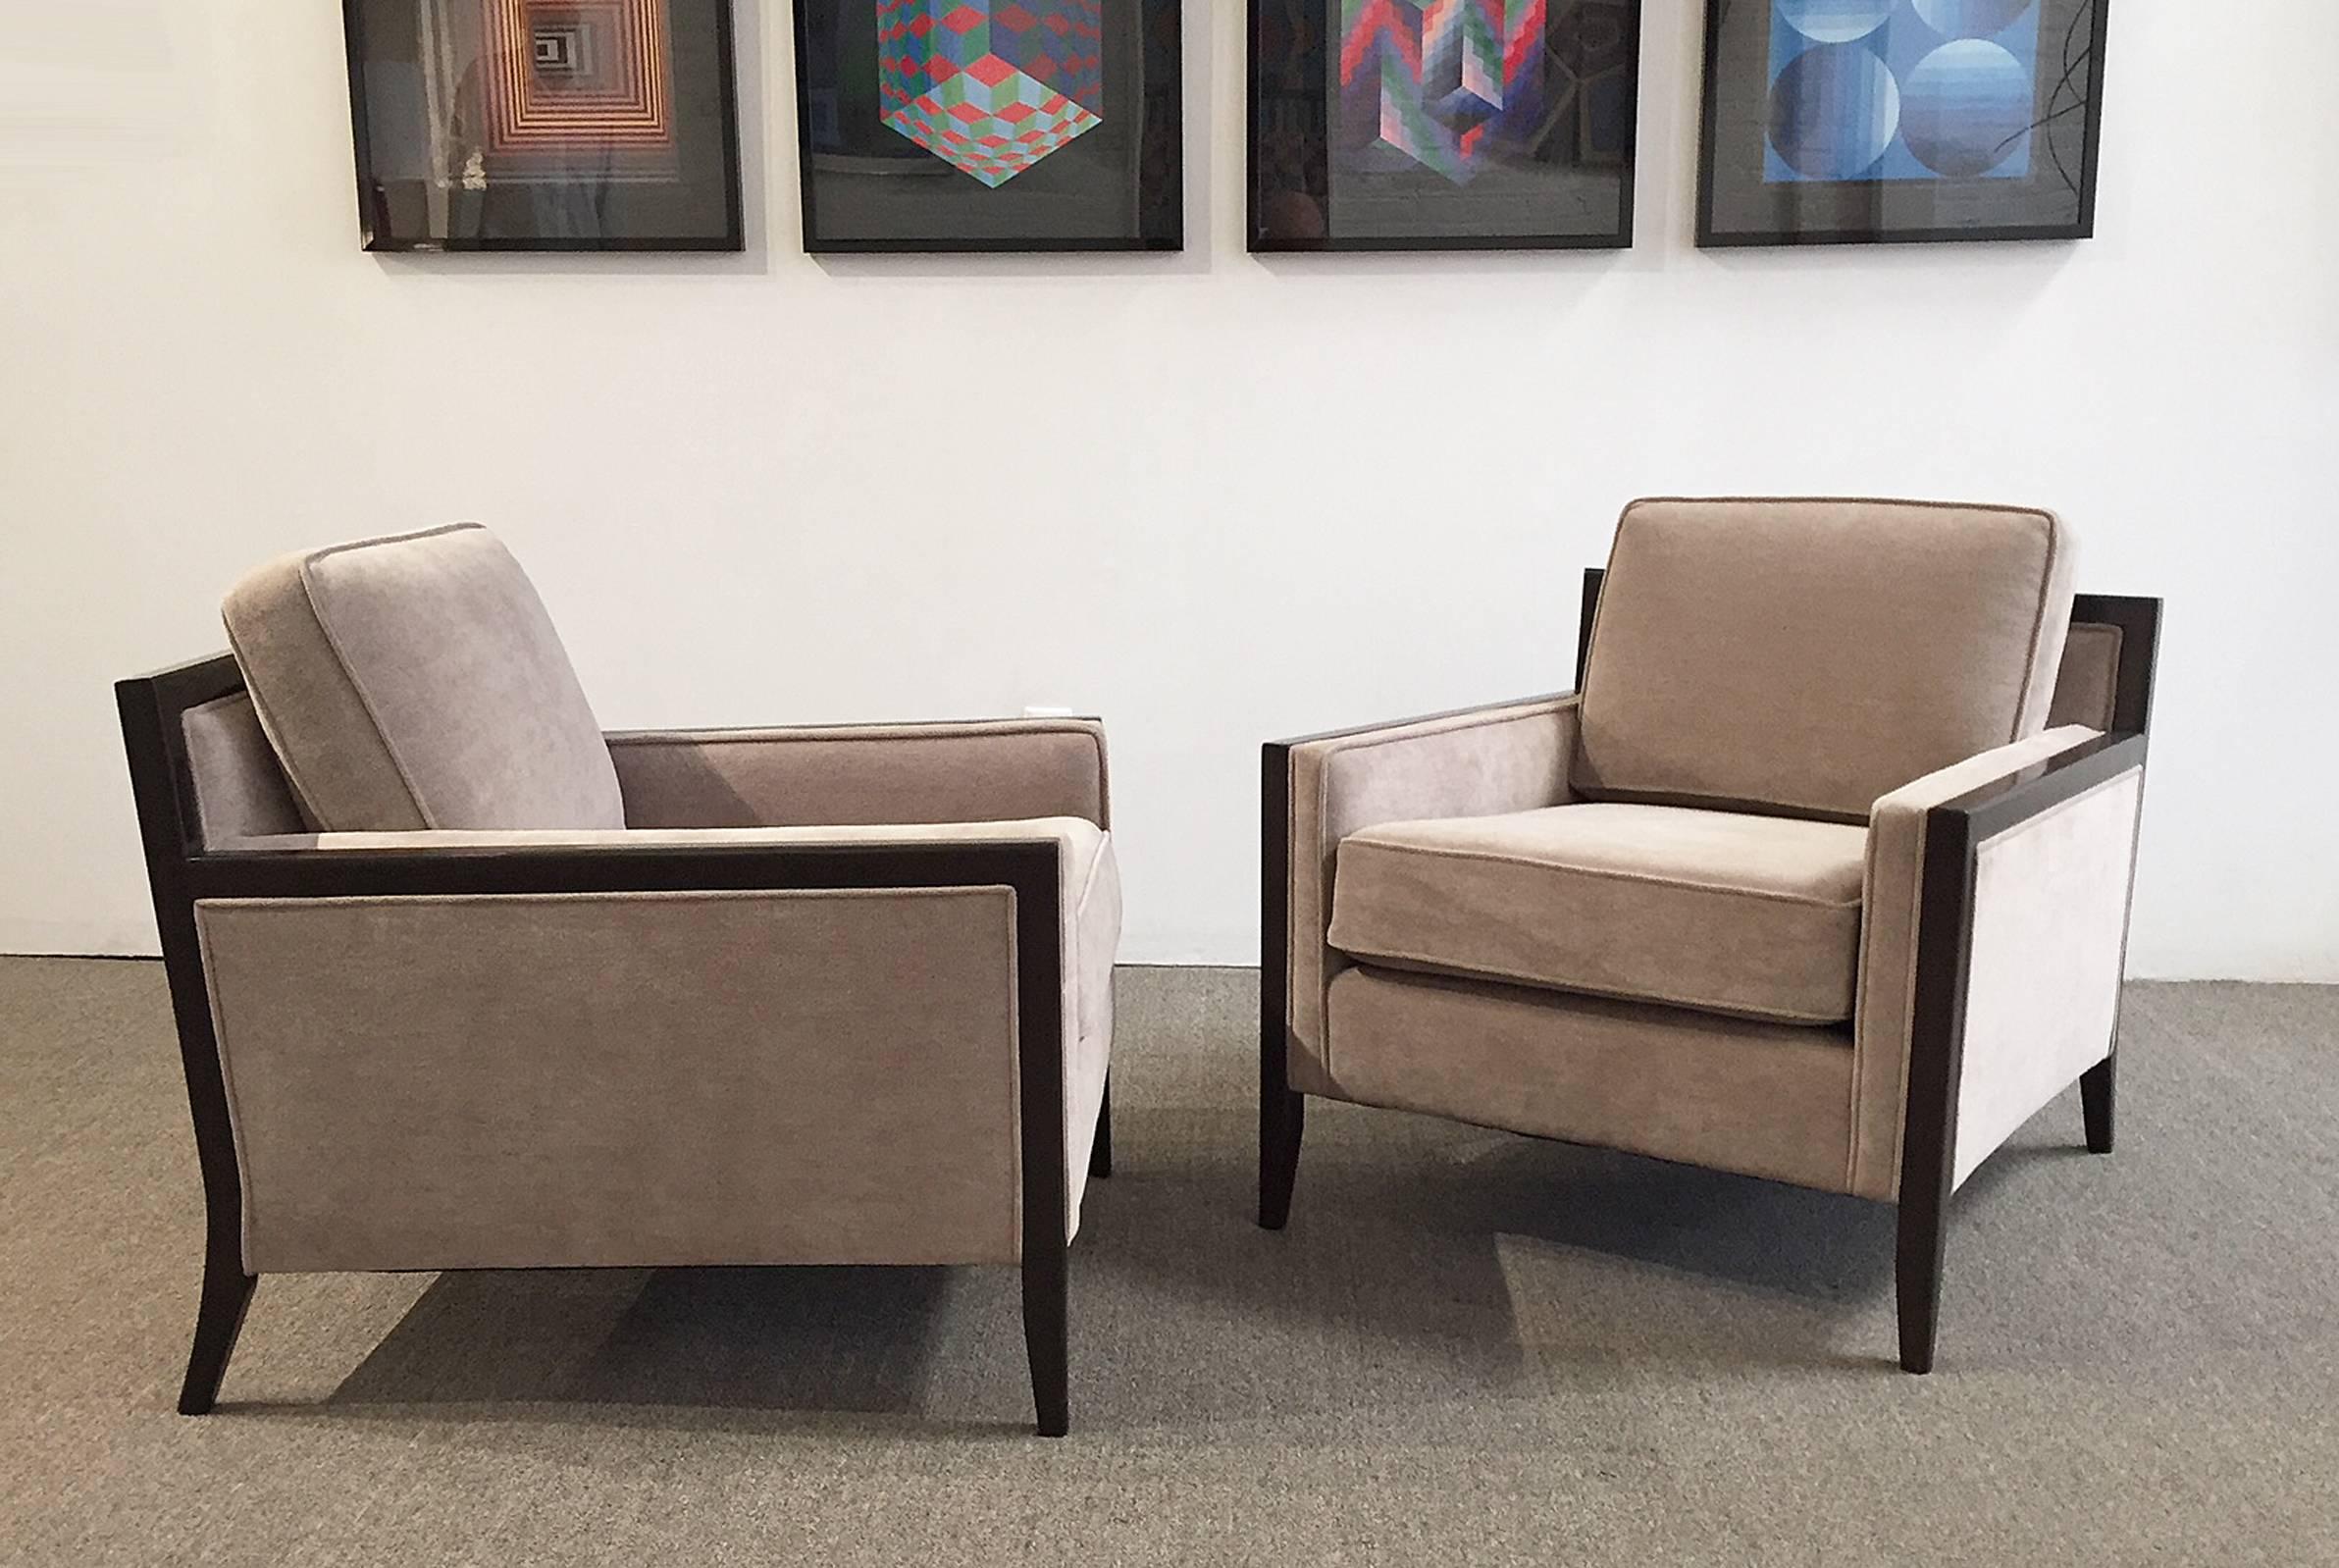 Hand-Crafted Mid-Century Modern Pair of Chairs